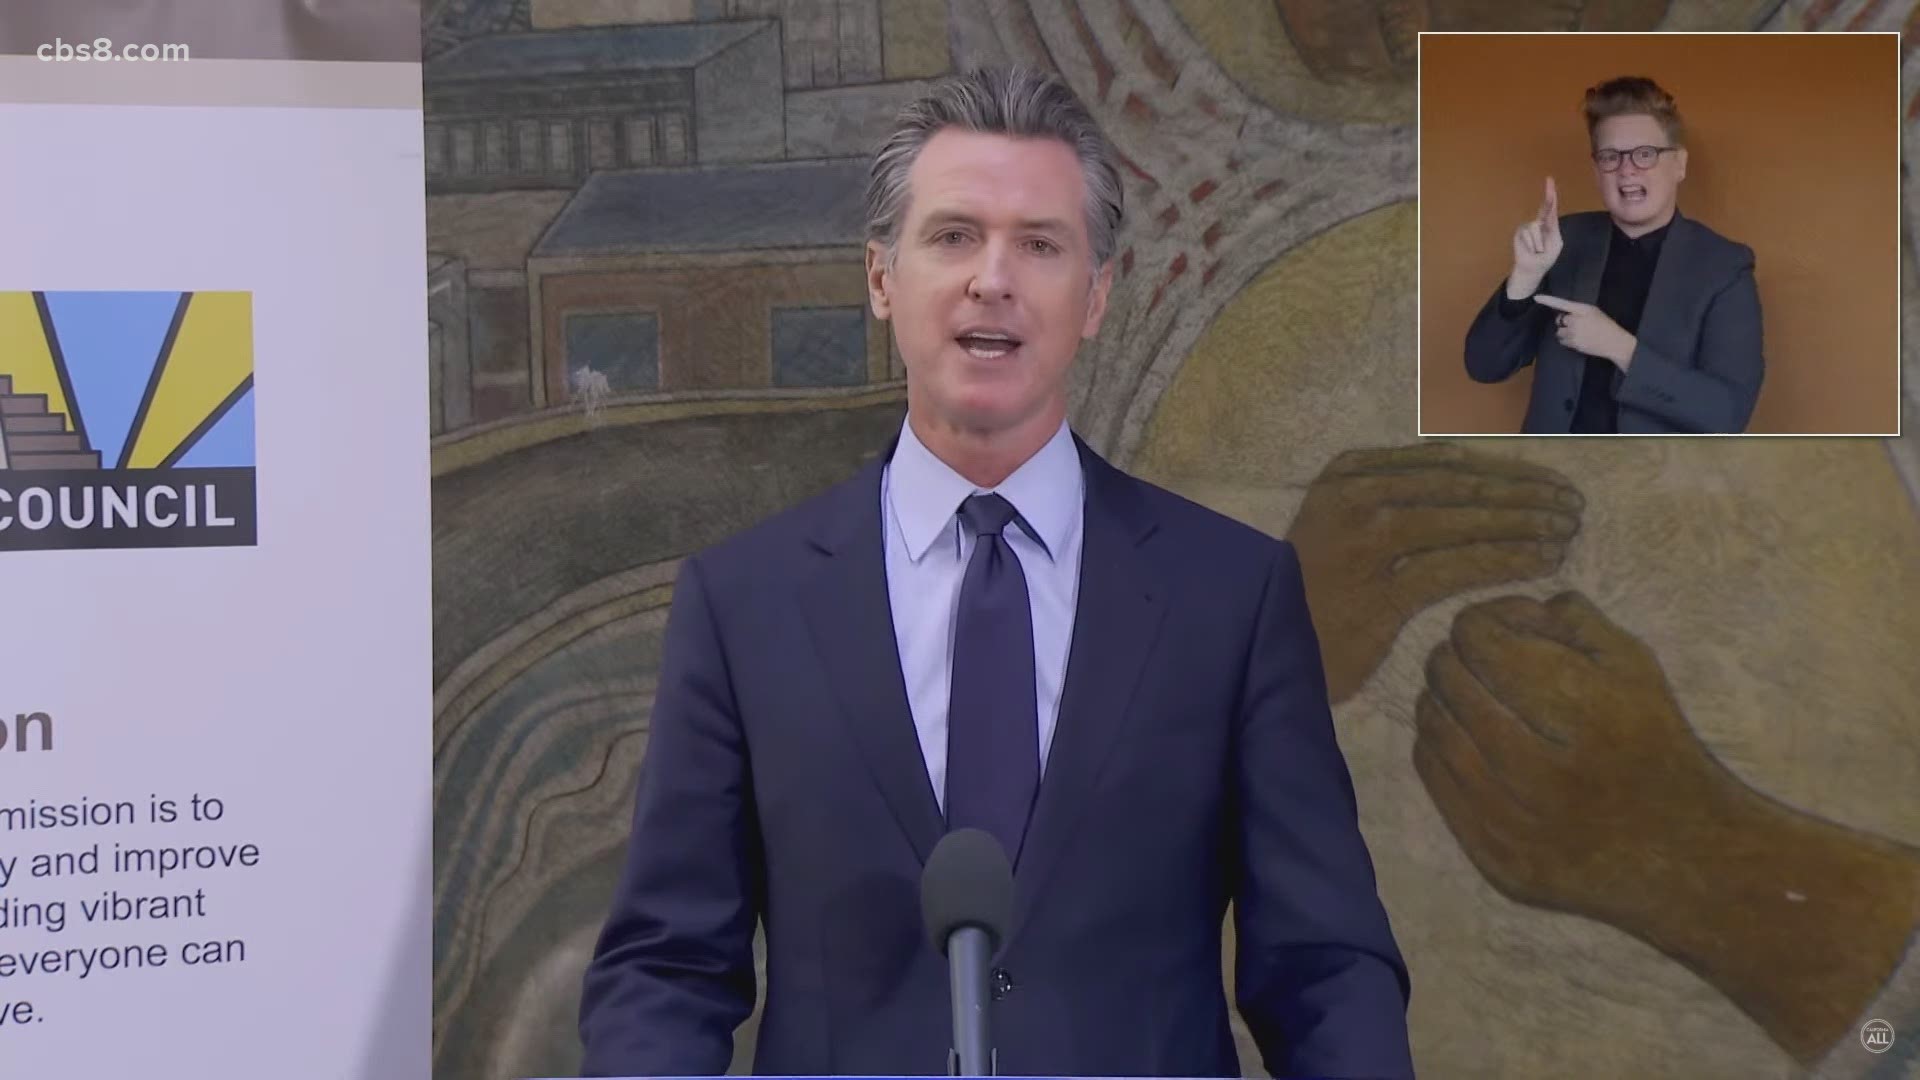 "2 out of every 3 Californians will now benefit from a stimulus check of at least $600. And families with kids will now get an additional $500."